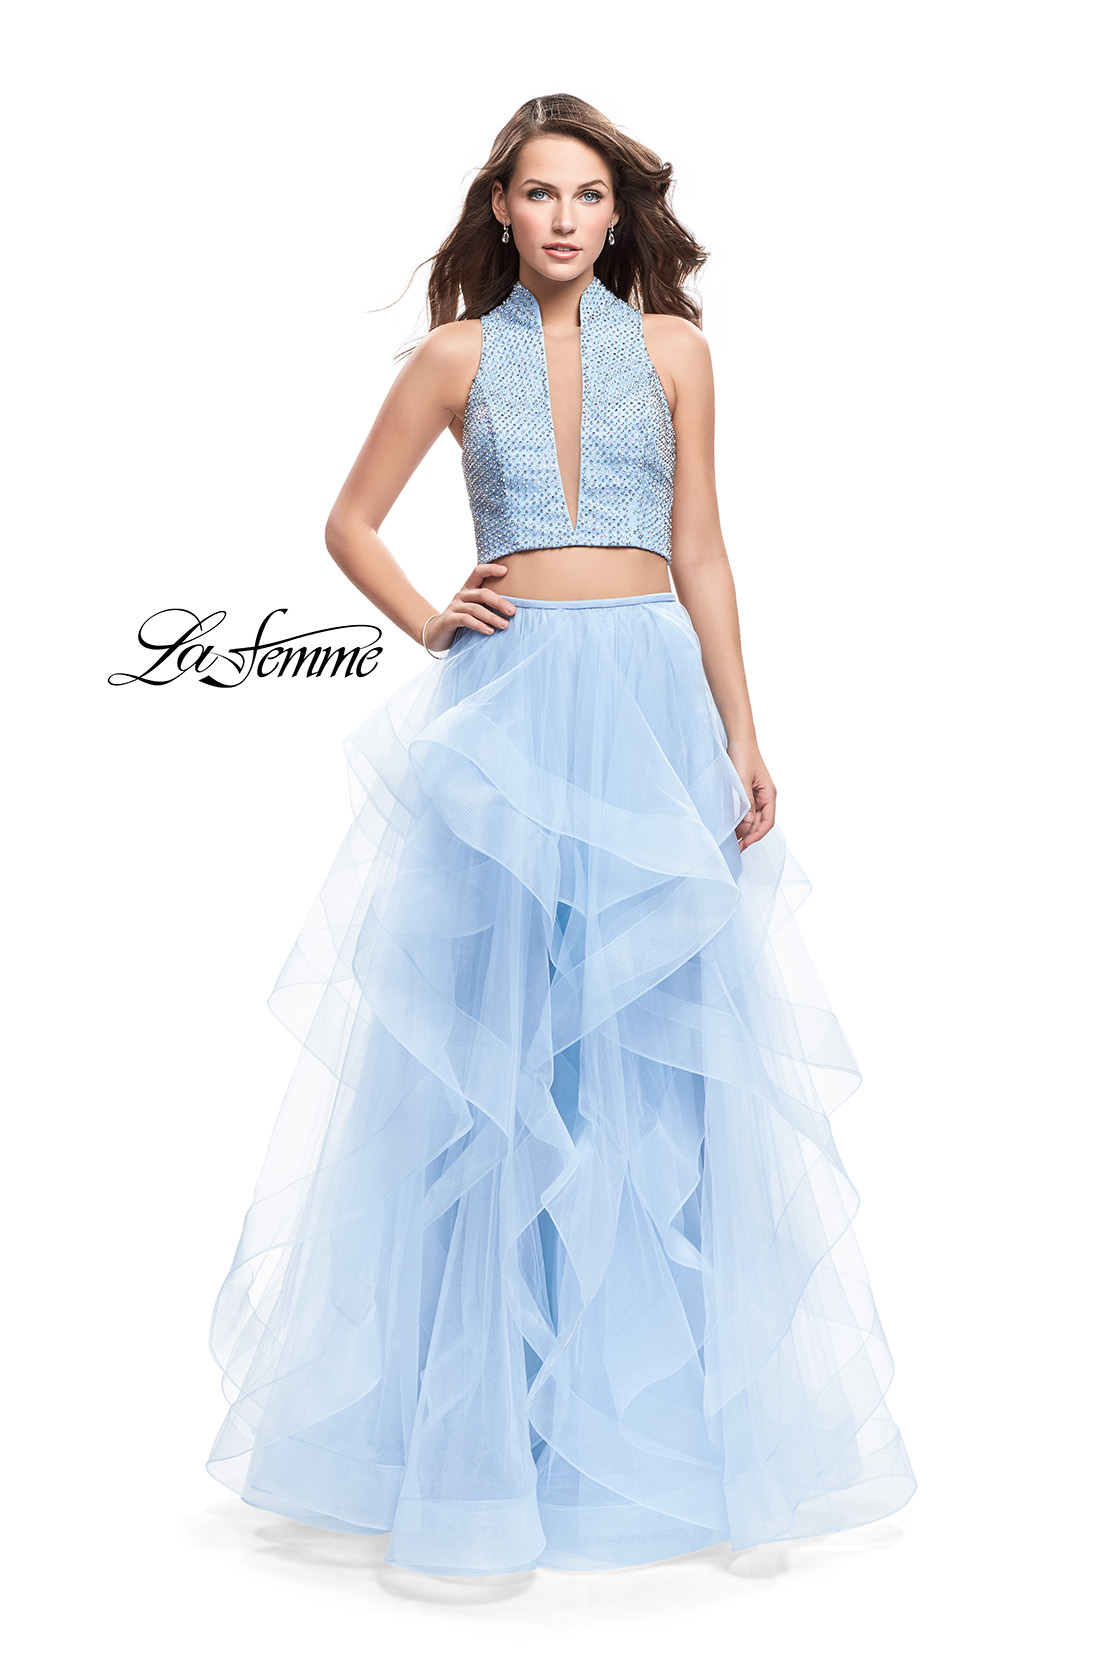 Powdery tulle dress with corset top